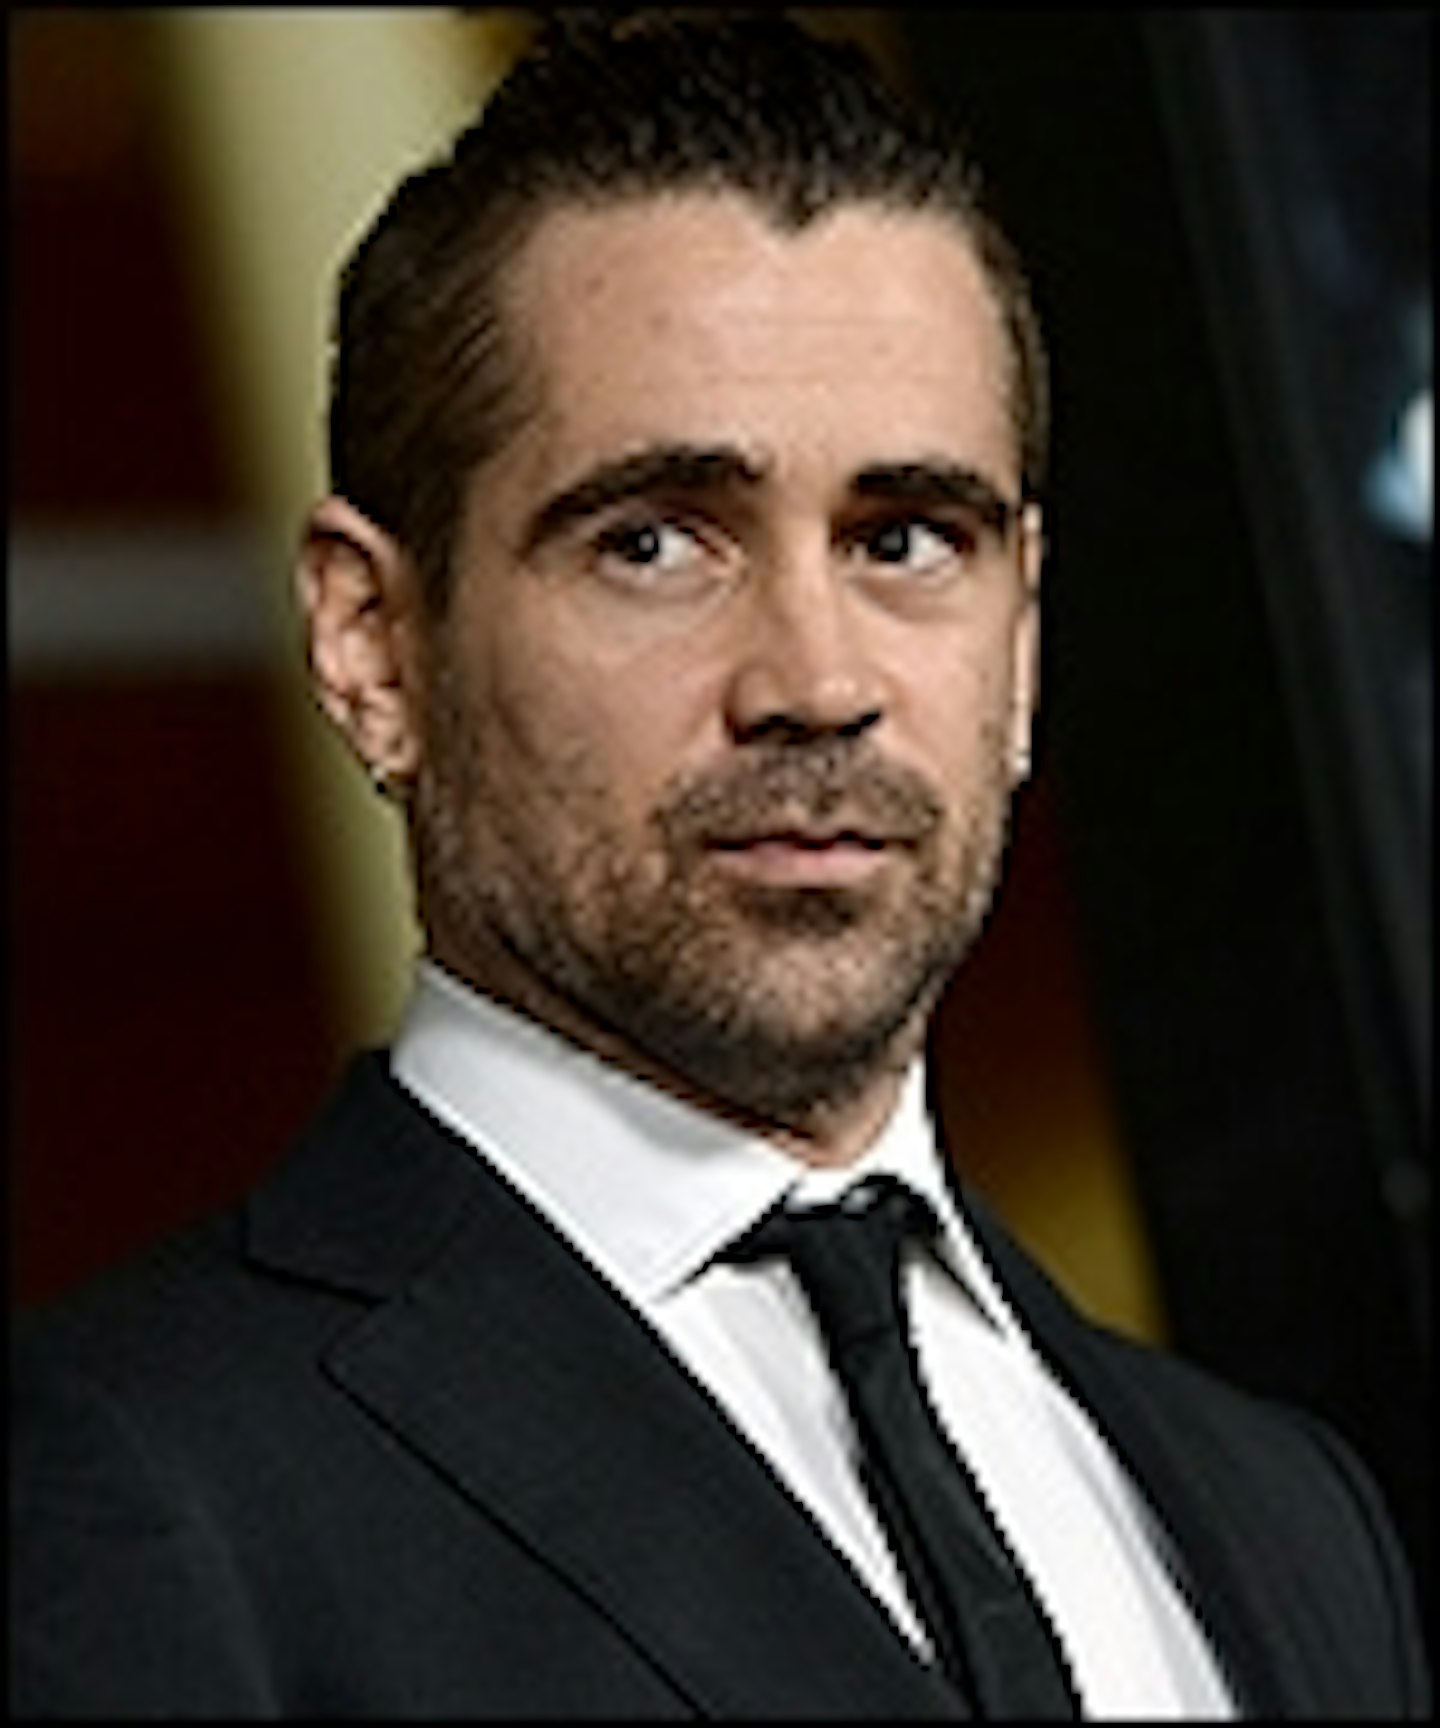 Colin Farrell On For Fantastic Beasts And Where To Find Them